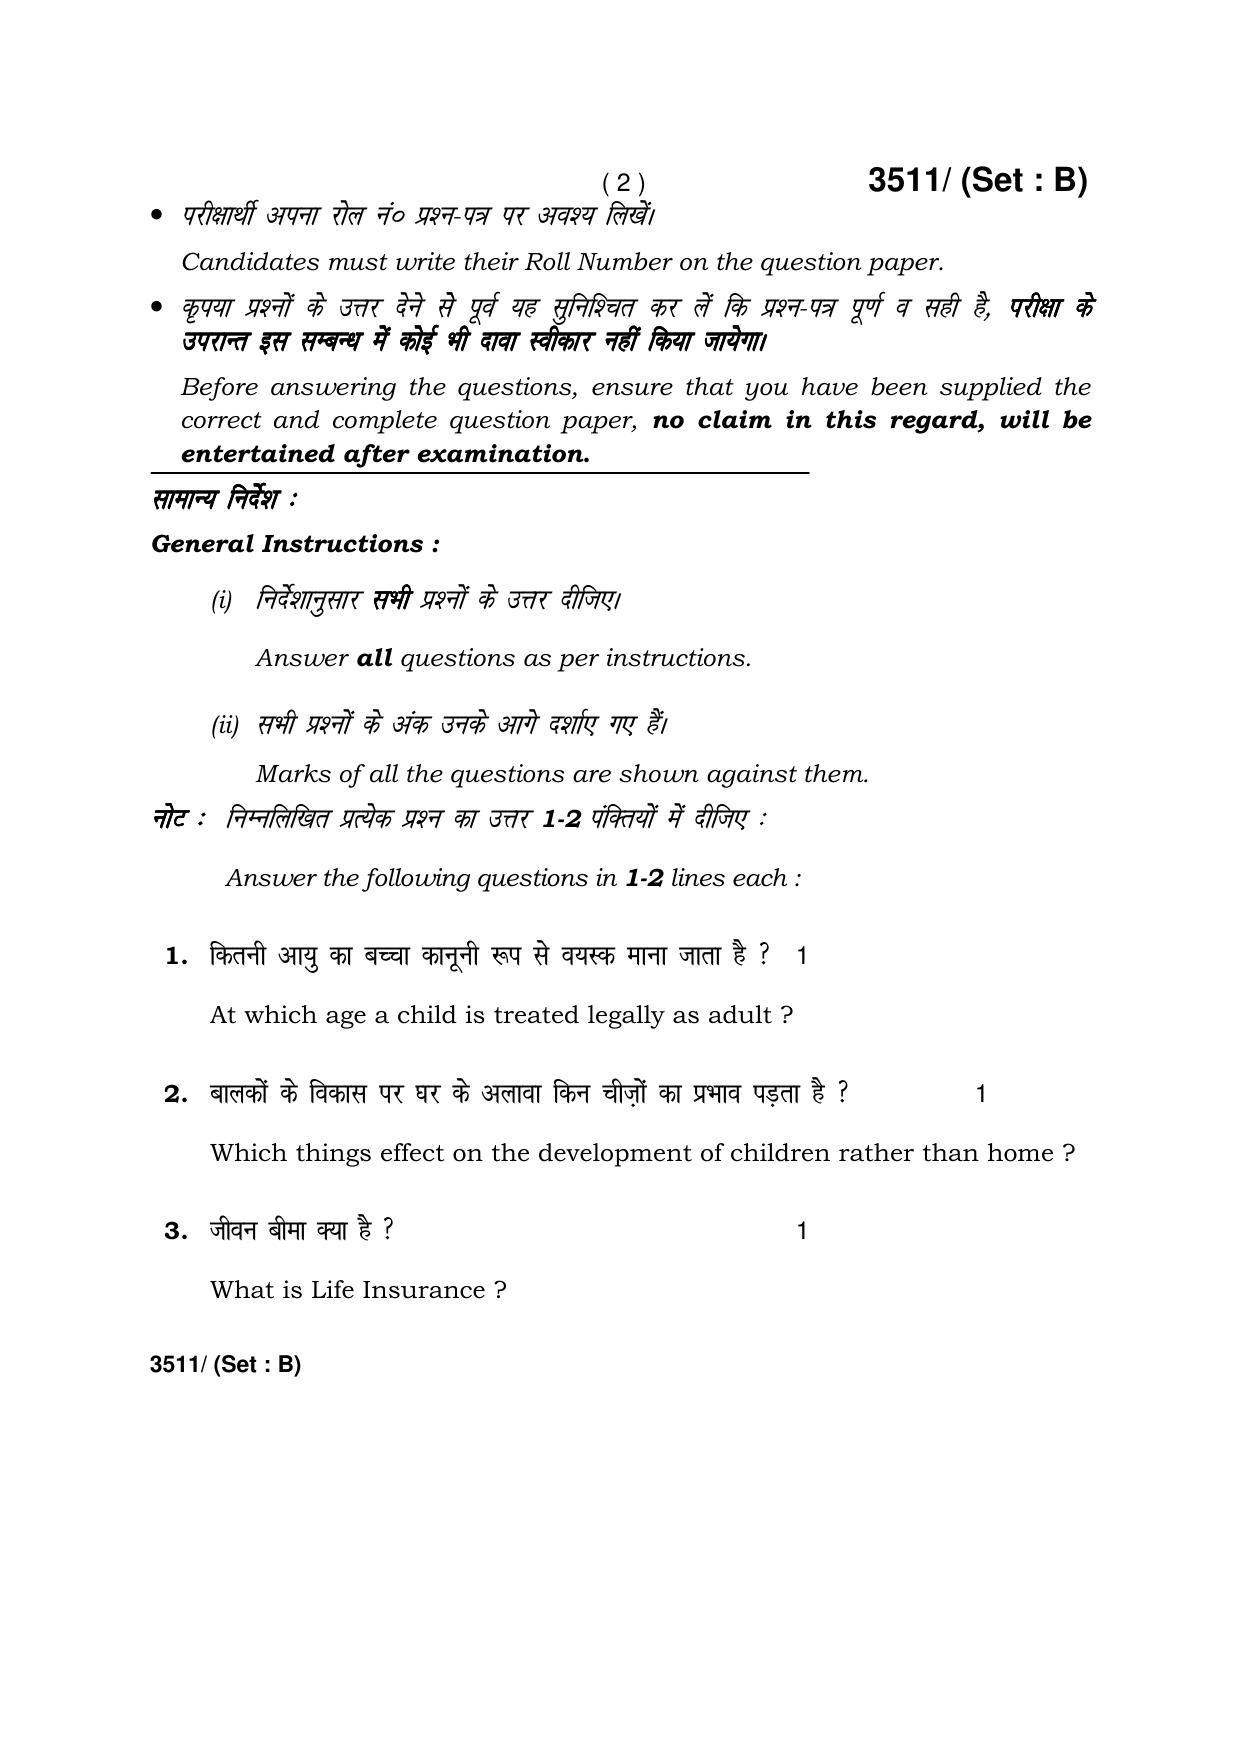 Haryana Board HBSE Class 10 Home Science -B 2018 Question Paper - Page 2